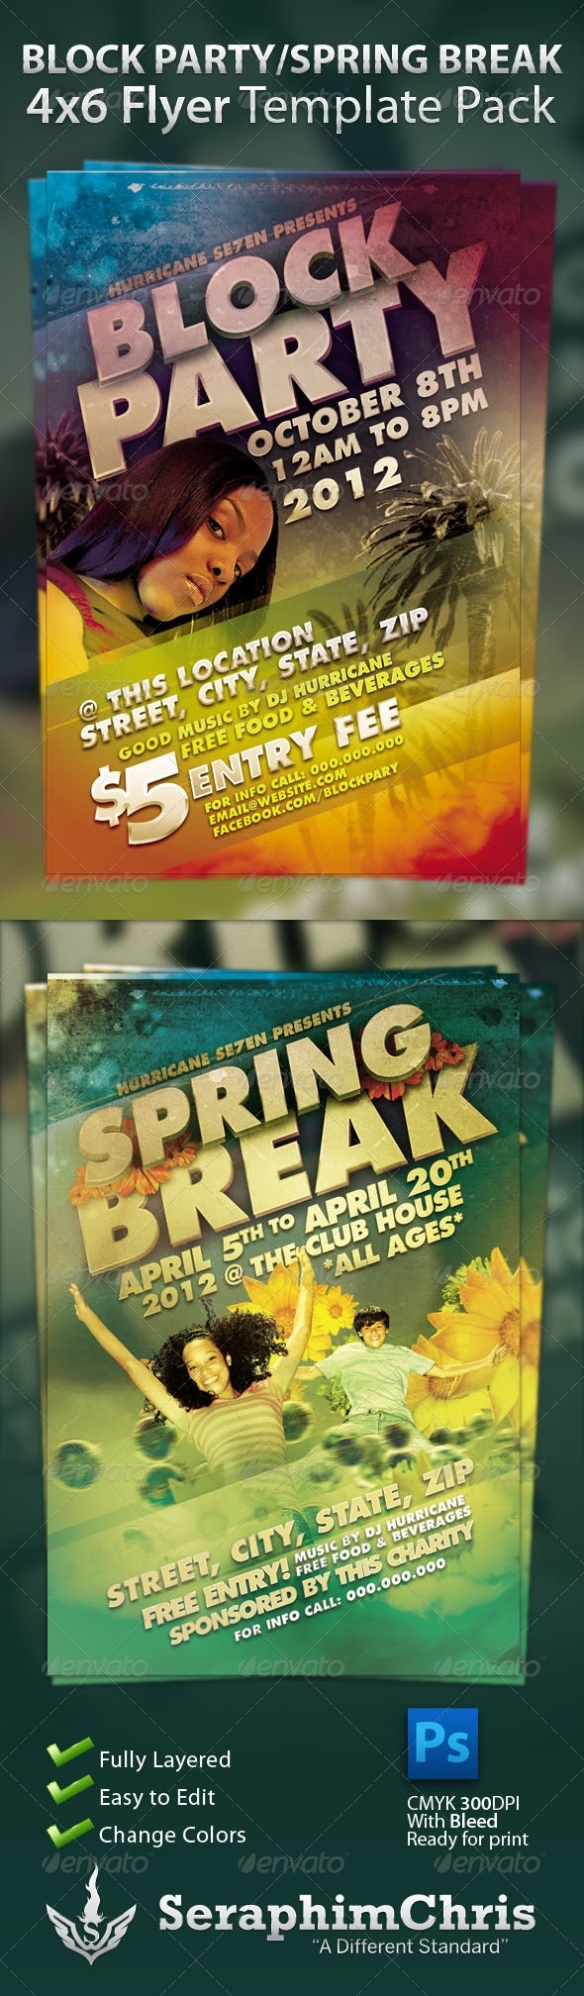 Block Party And Spring Break Flyer Template Pack By Seraphimchris Throughout Block Party Template Flyer